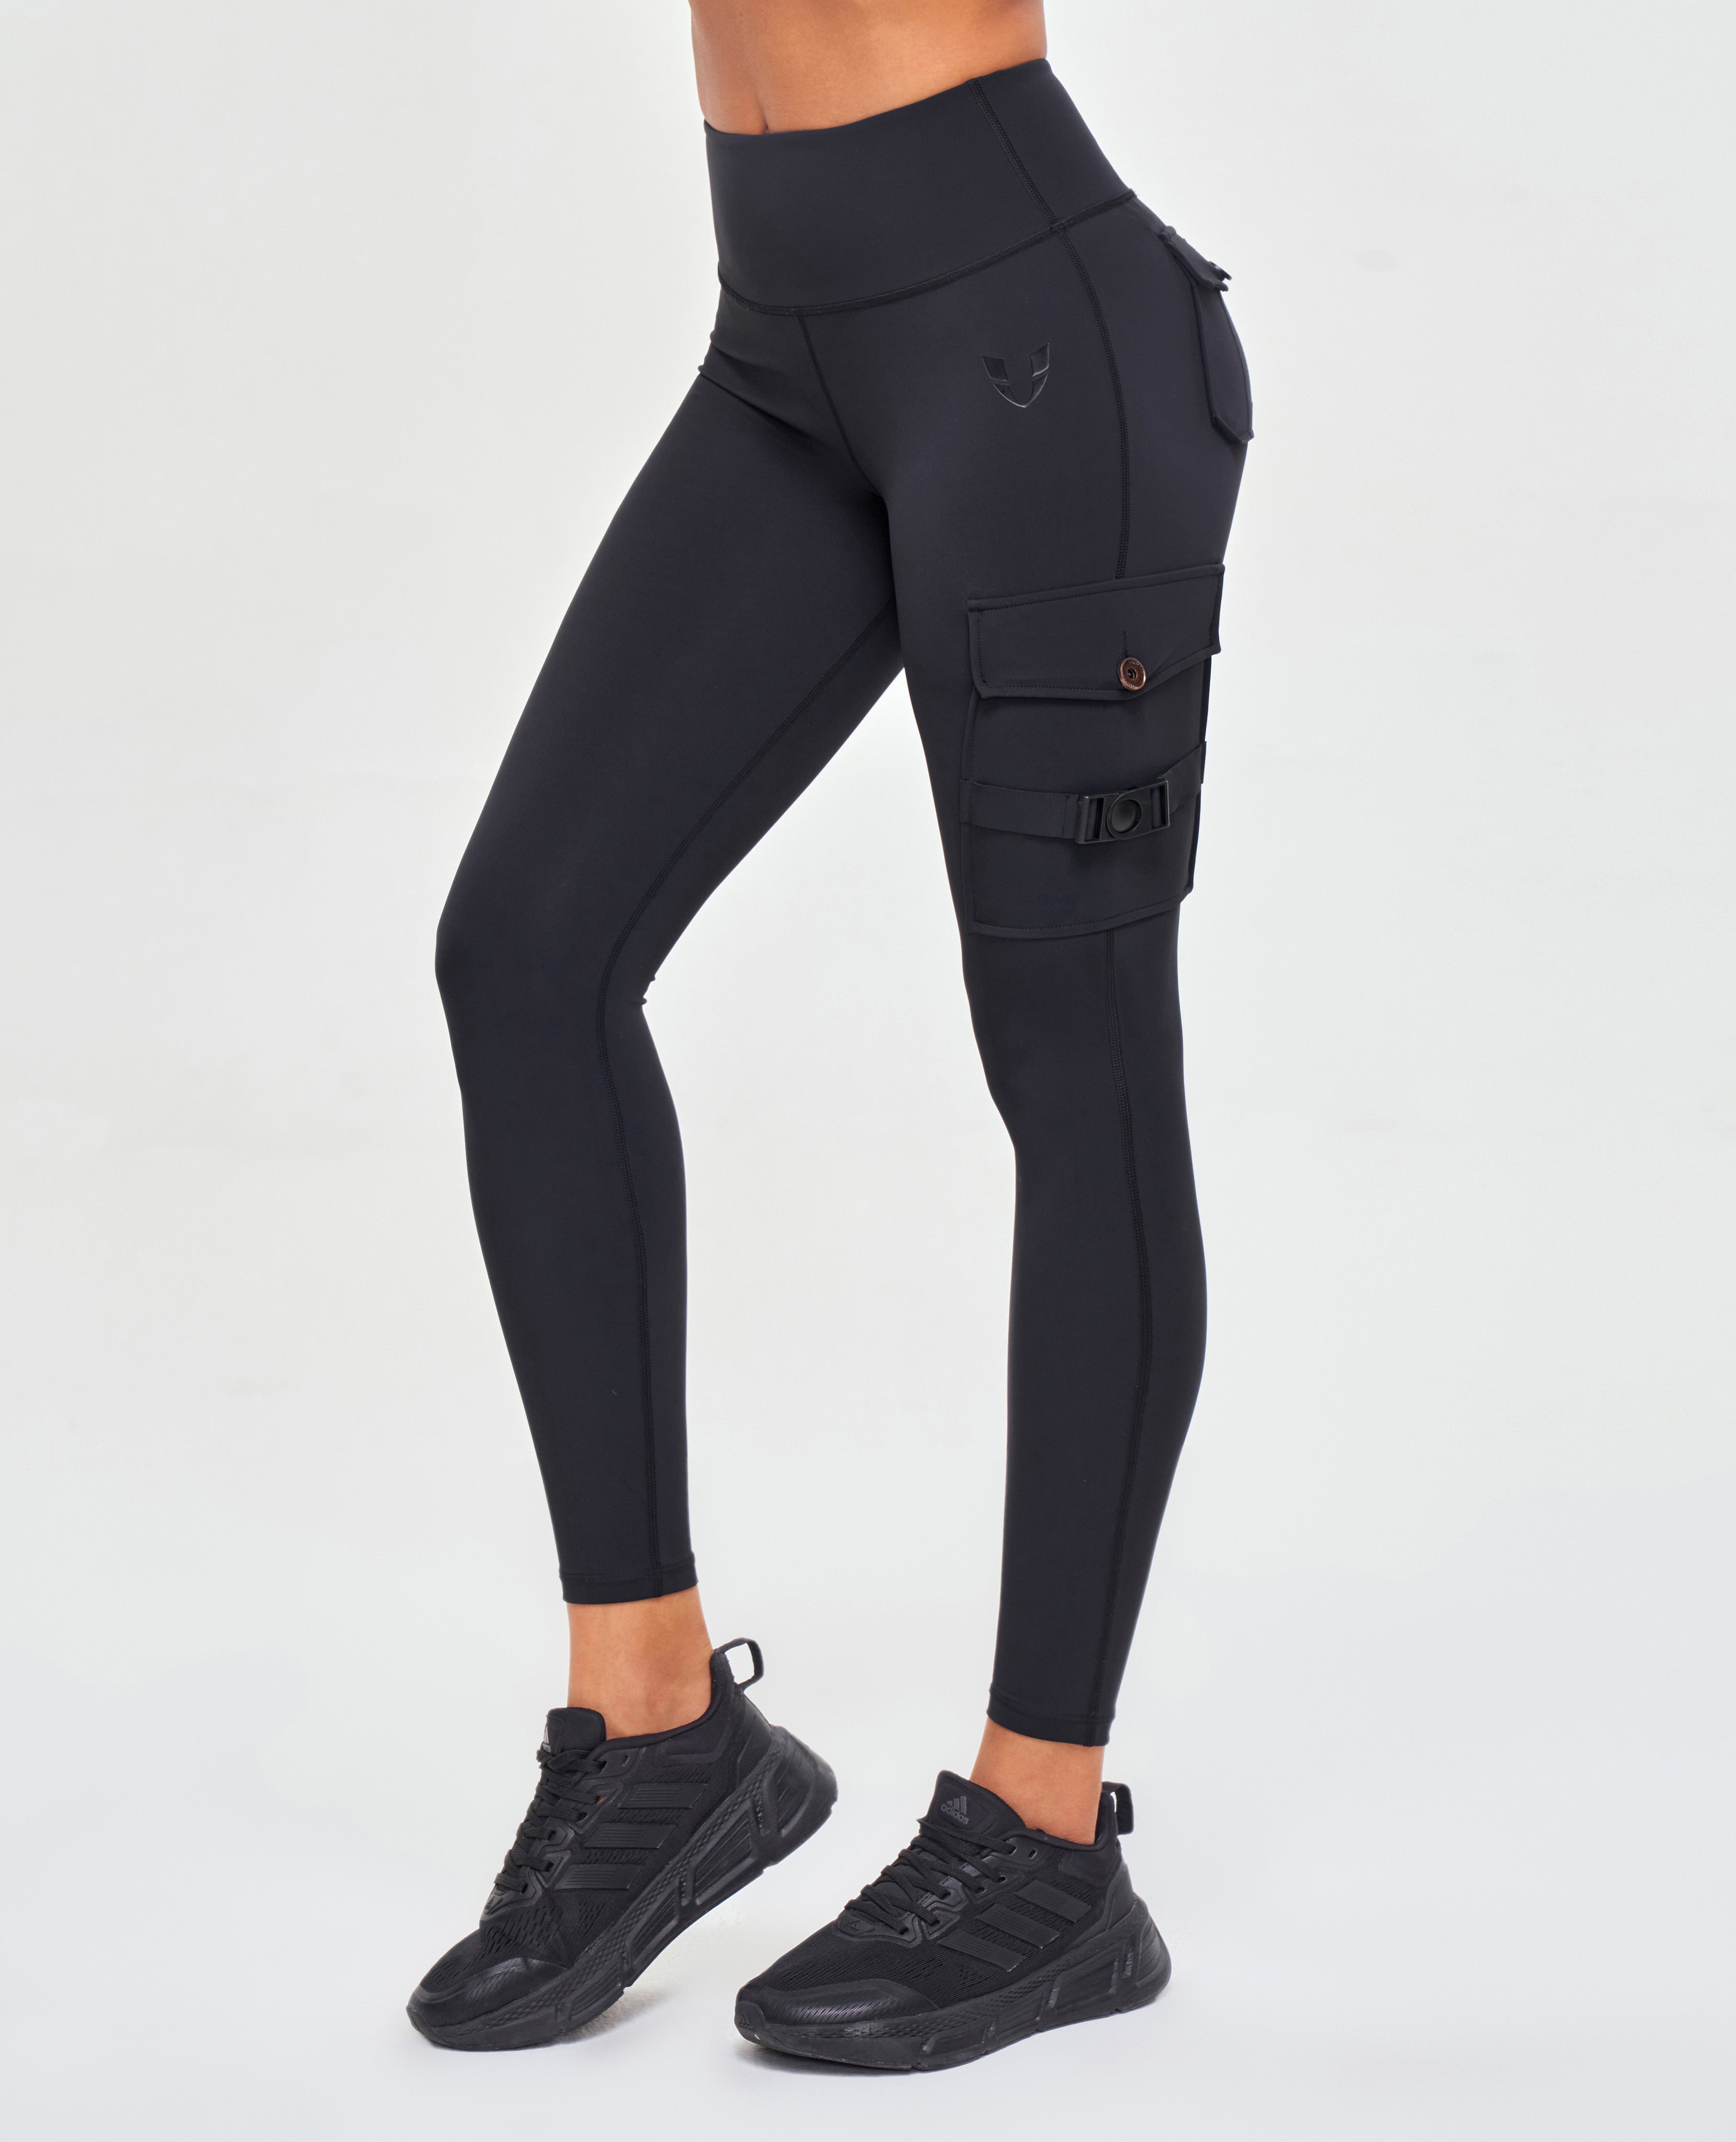 Feel the burn in a new way with these cargo fitness leggings. Our